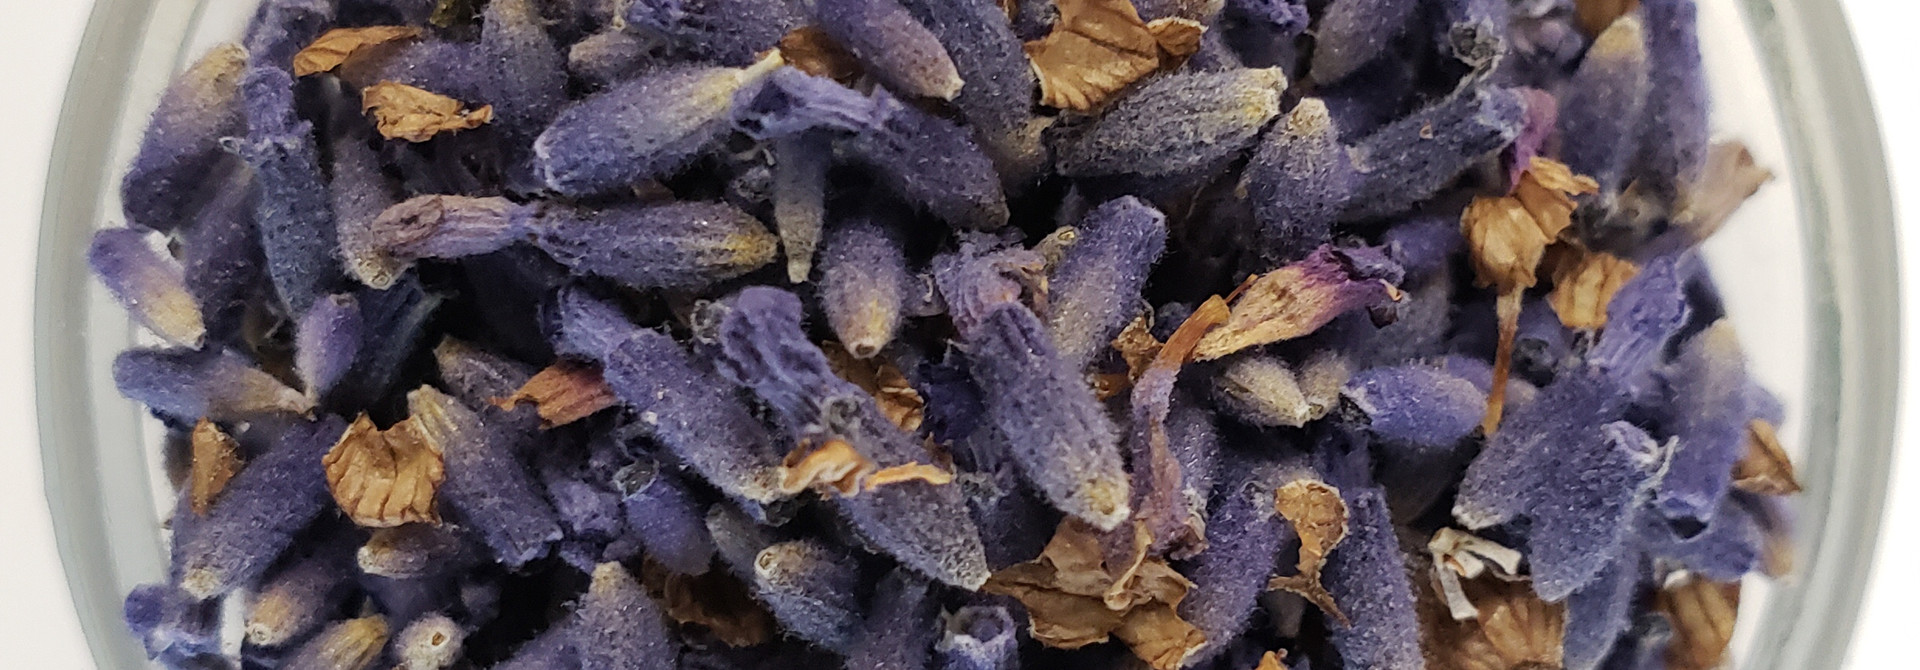 Whole Culinary Lavender